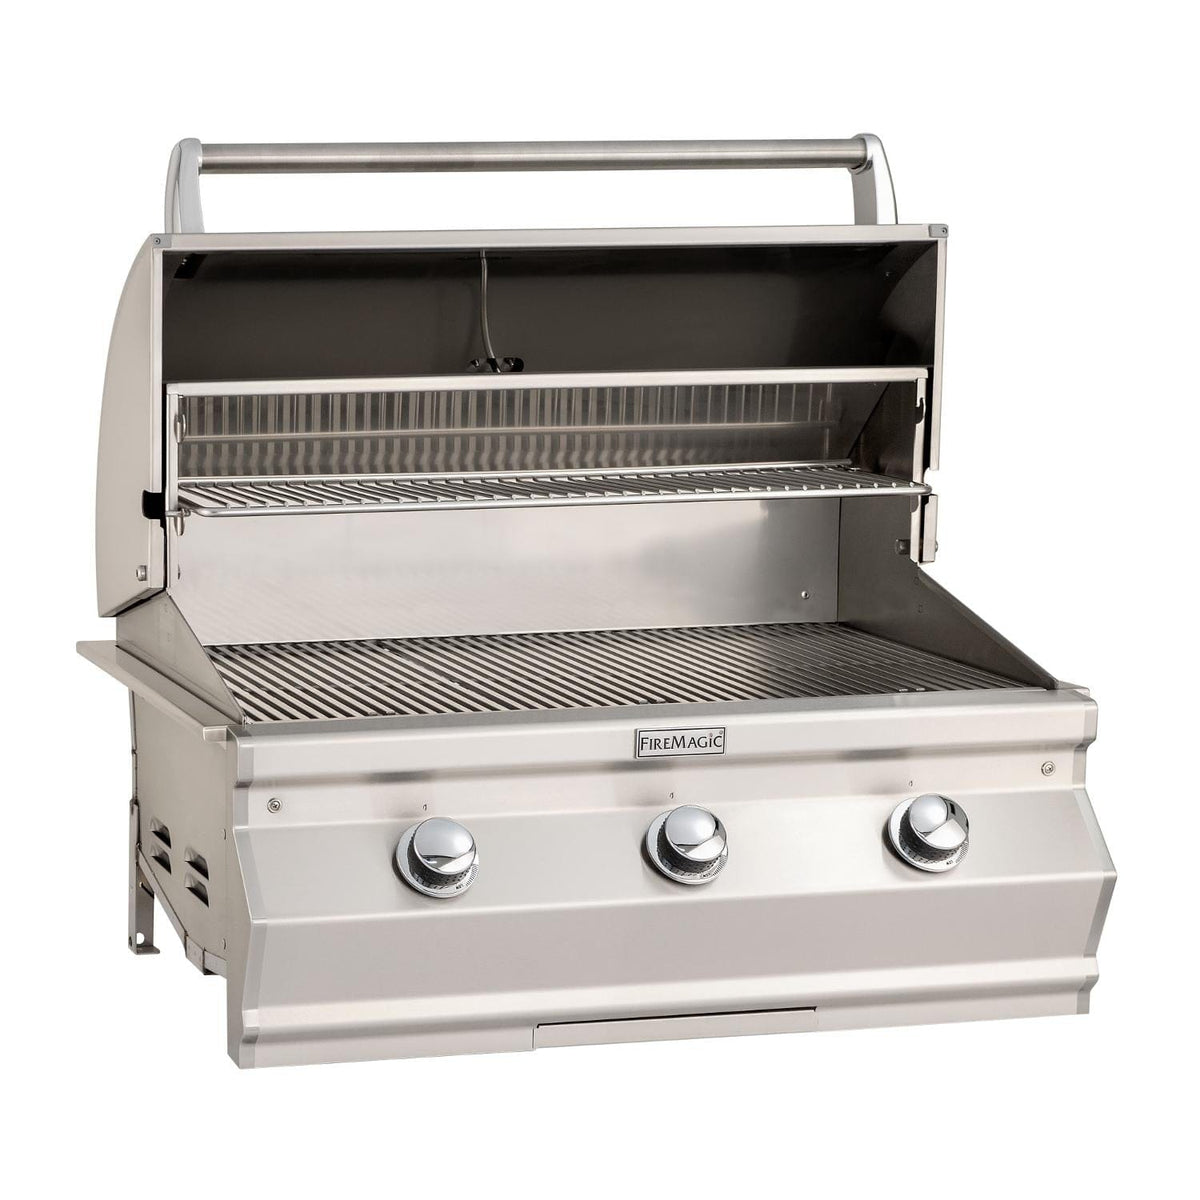 Firemagic Grills Fire Magic Choice C540I 30-Inch Built-In Gas Grill With Analog Thermometer - C540I-RT1